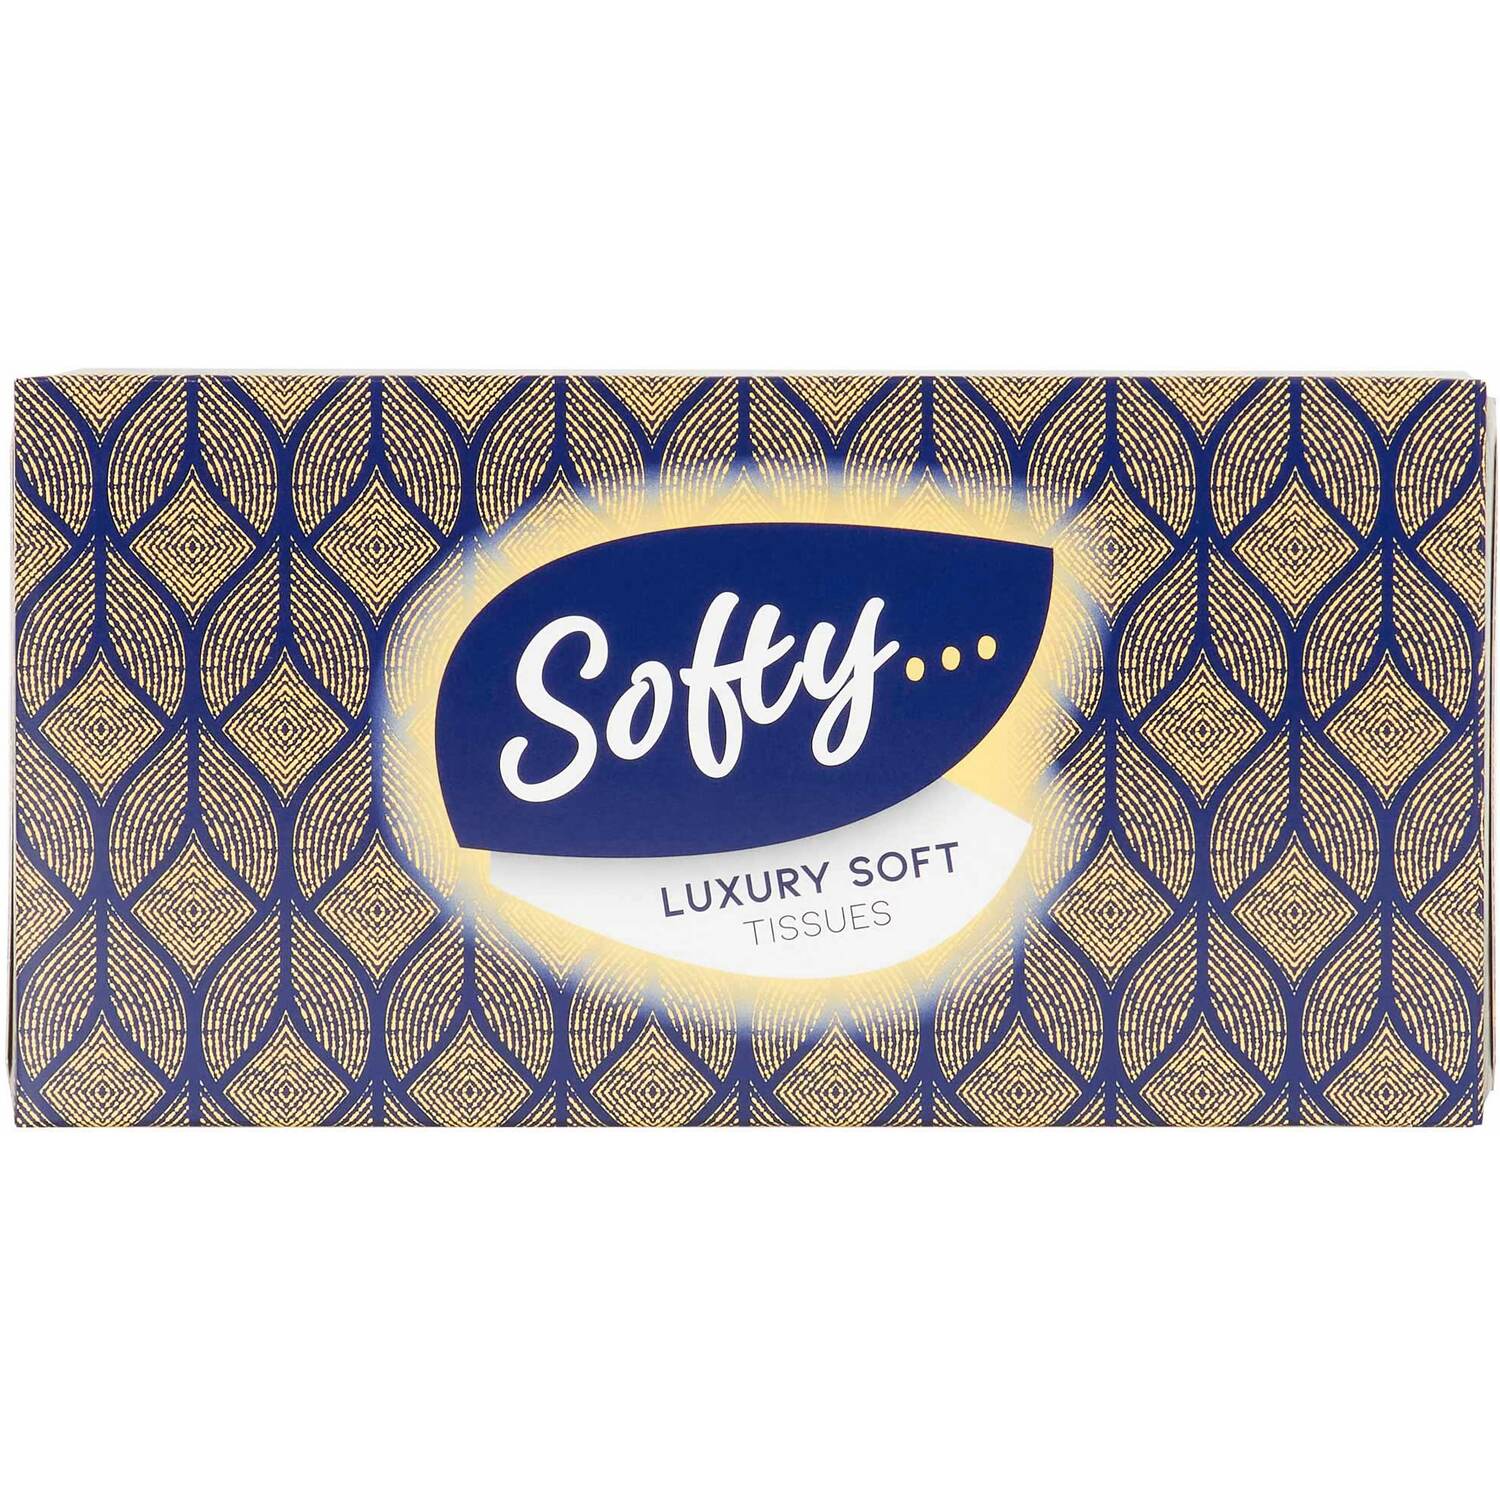 Softy Luxury Soft Tissues 72 Sheets 3 Ply Image 1